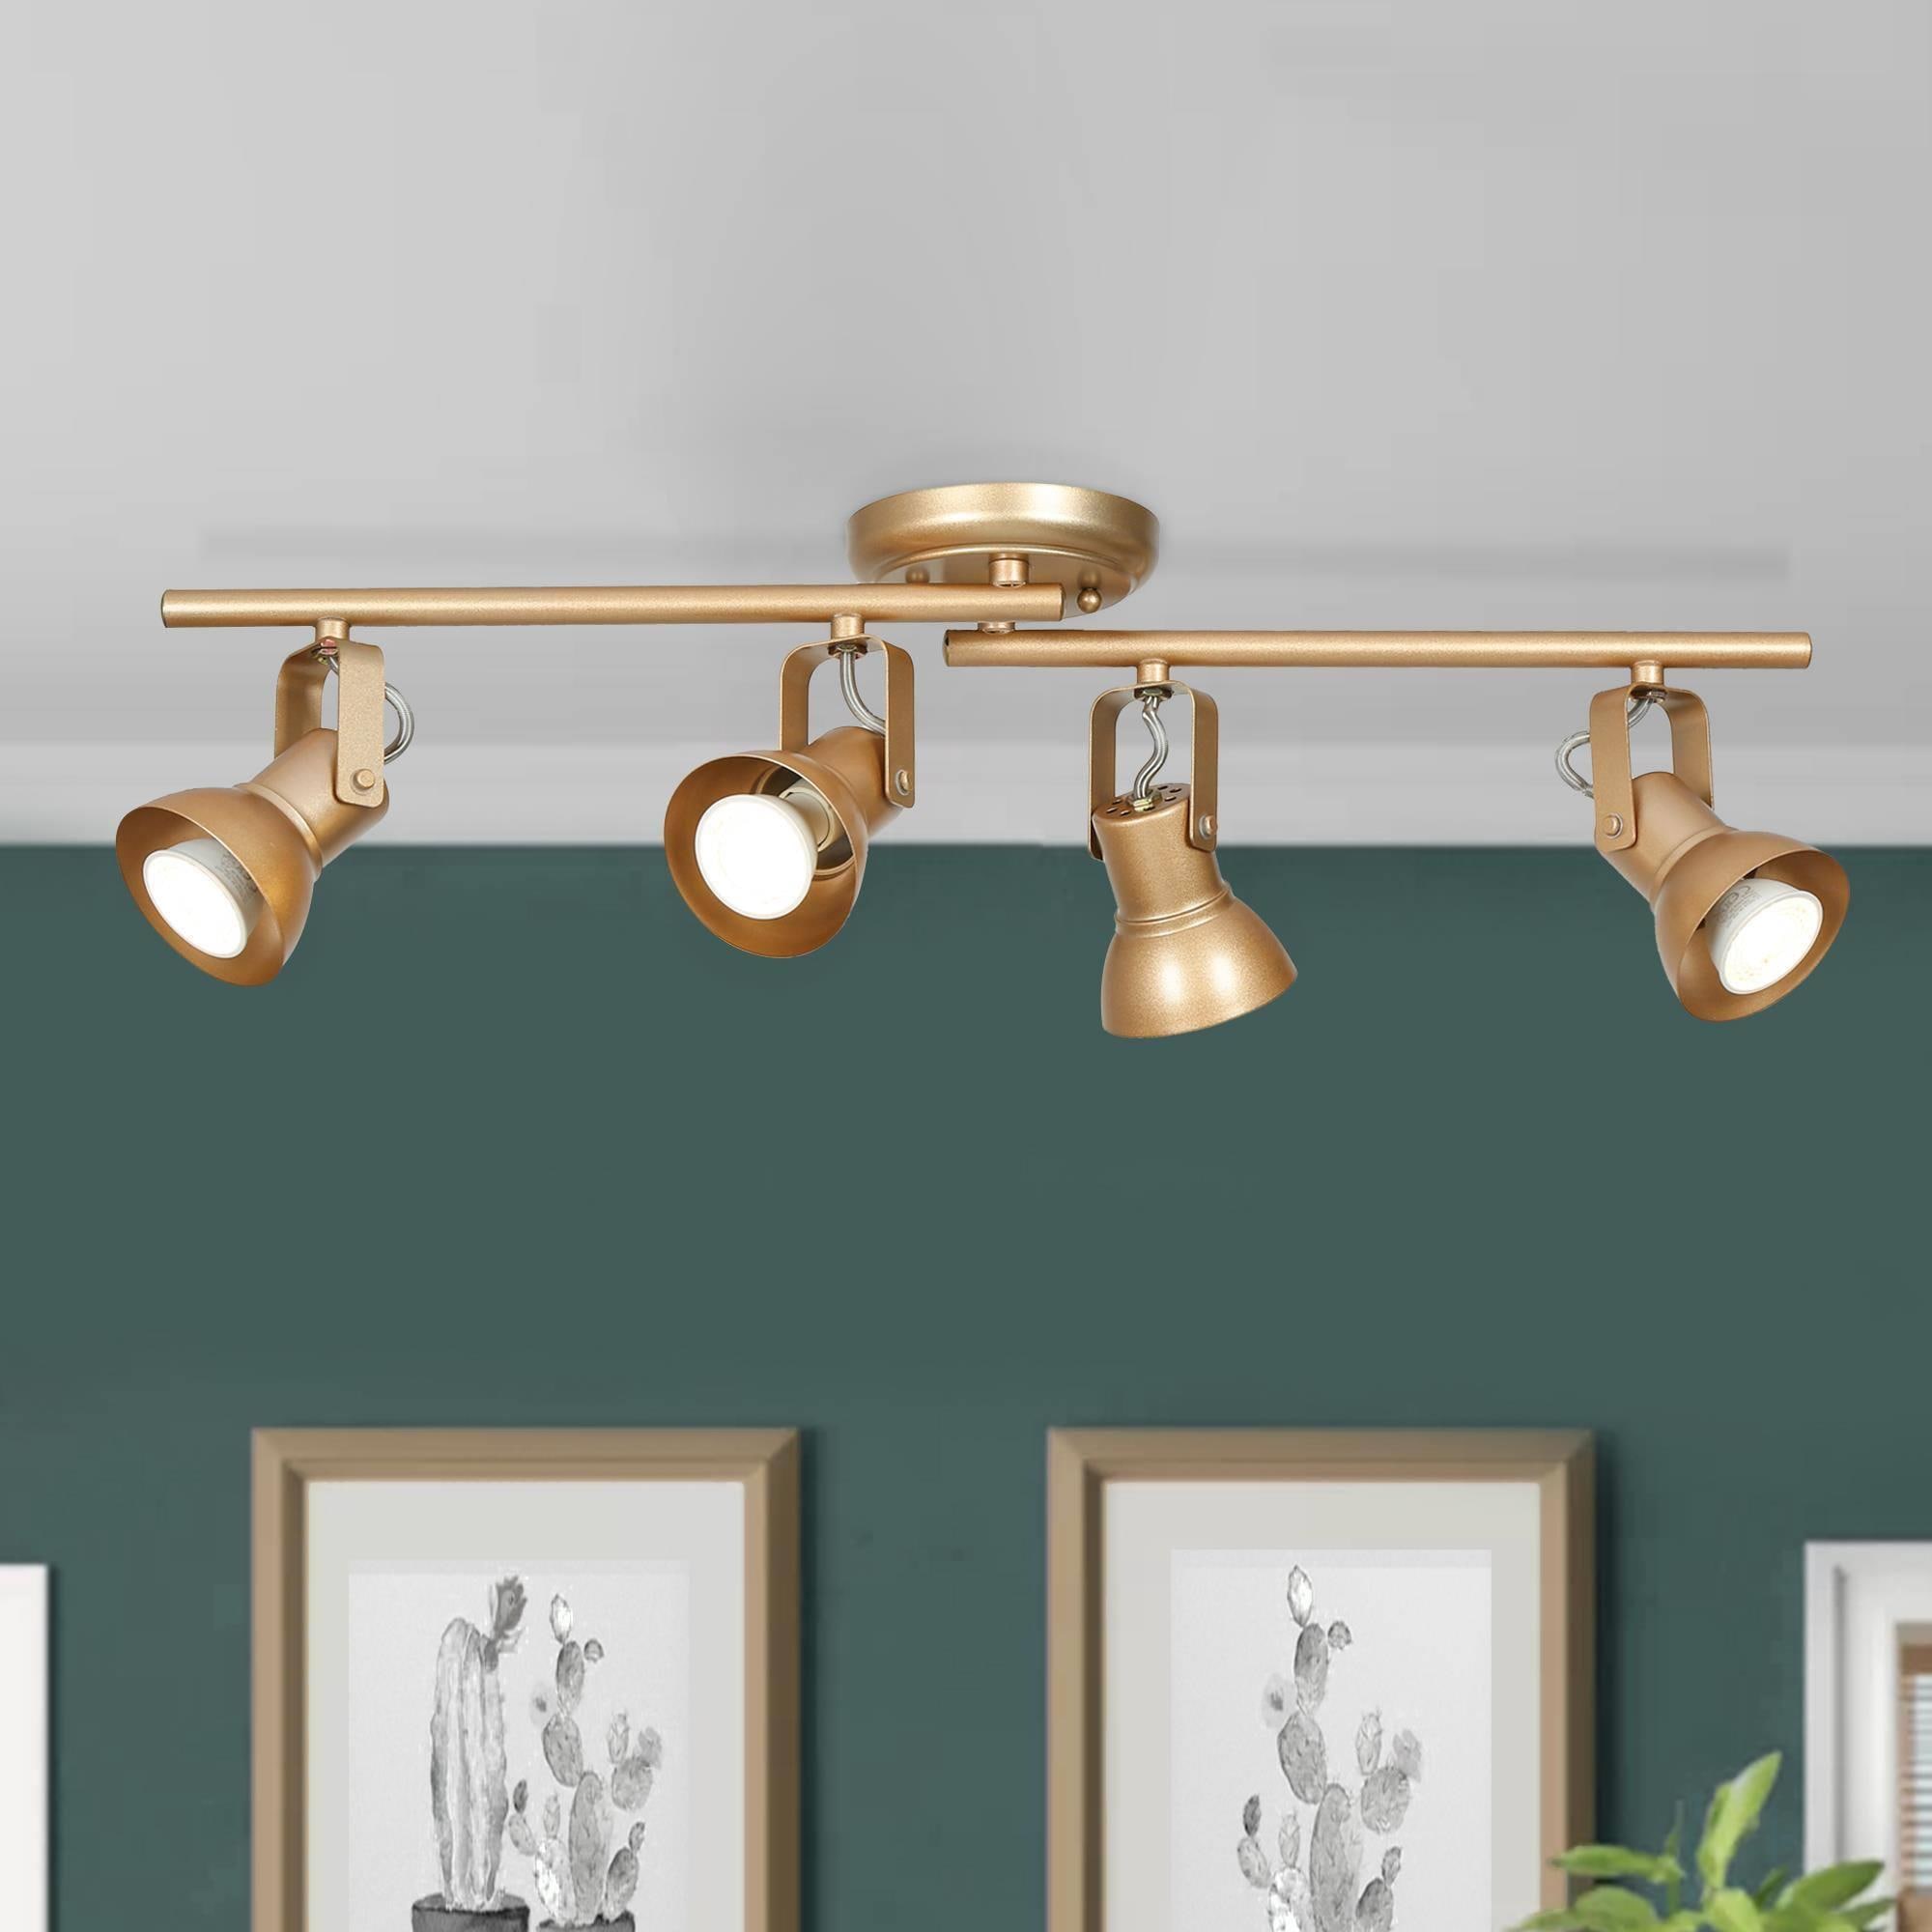 Montgomery Langwerpig Eigenwijs Uolfin Head-Rota 29-in 4-Light Matte Gold Gourd with Adjustable Spot Light  Base dimmable Gu10 Pin Base Modern/Contemporary Track Bar in the Fixed  Track Lighting Kits department at Lowes.com